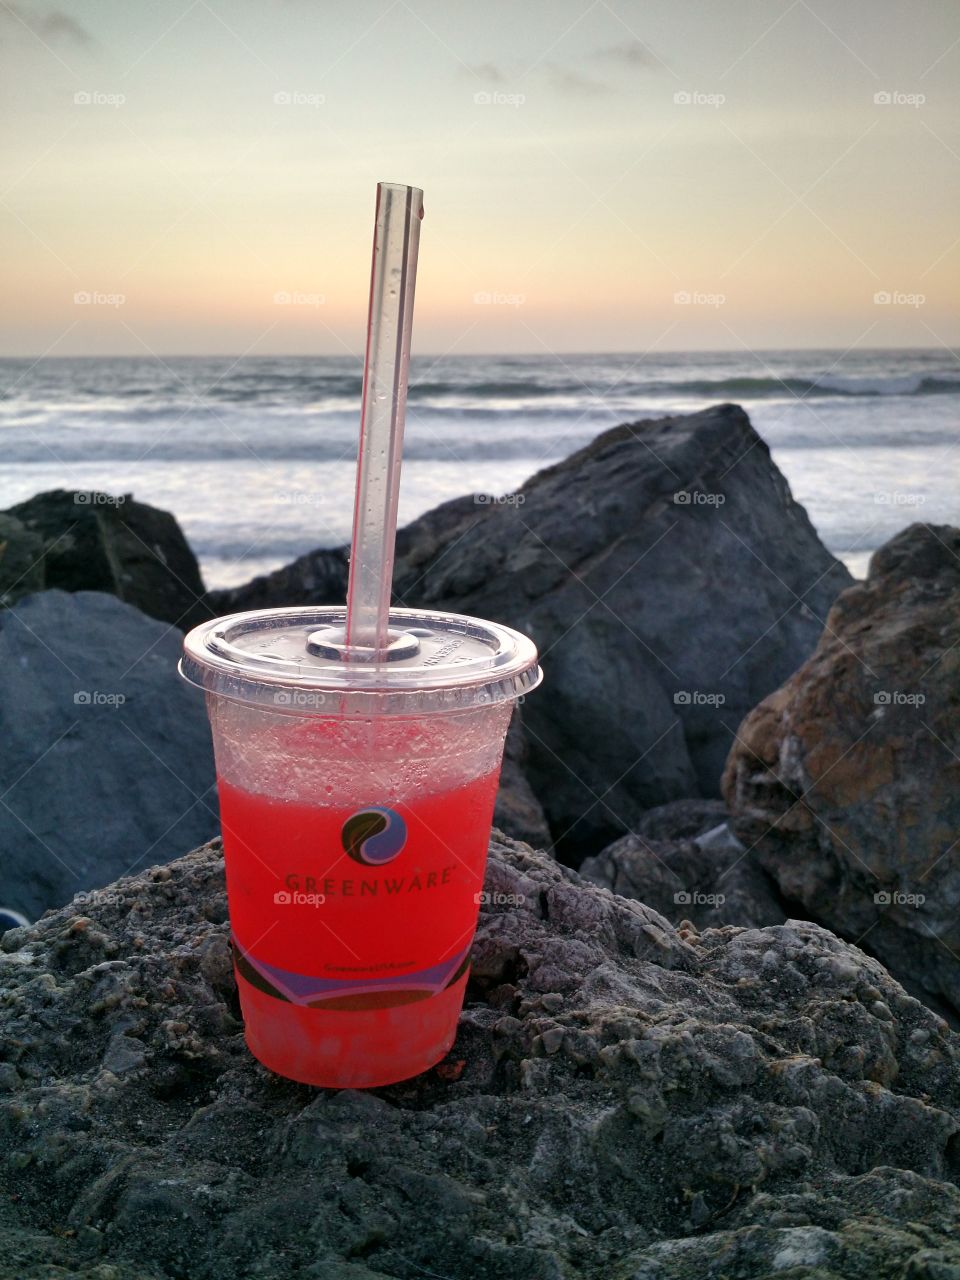 drink enjoys a sunset. Pacificia, CA.